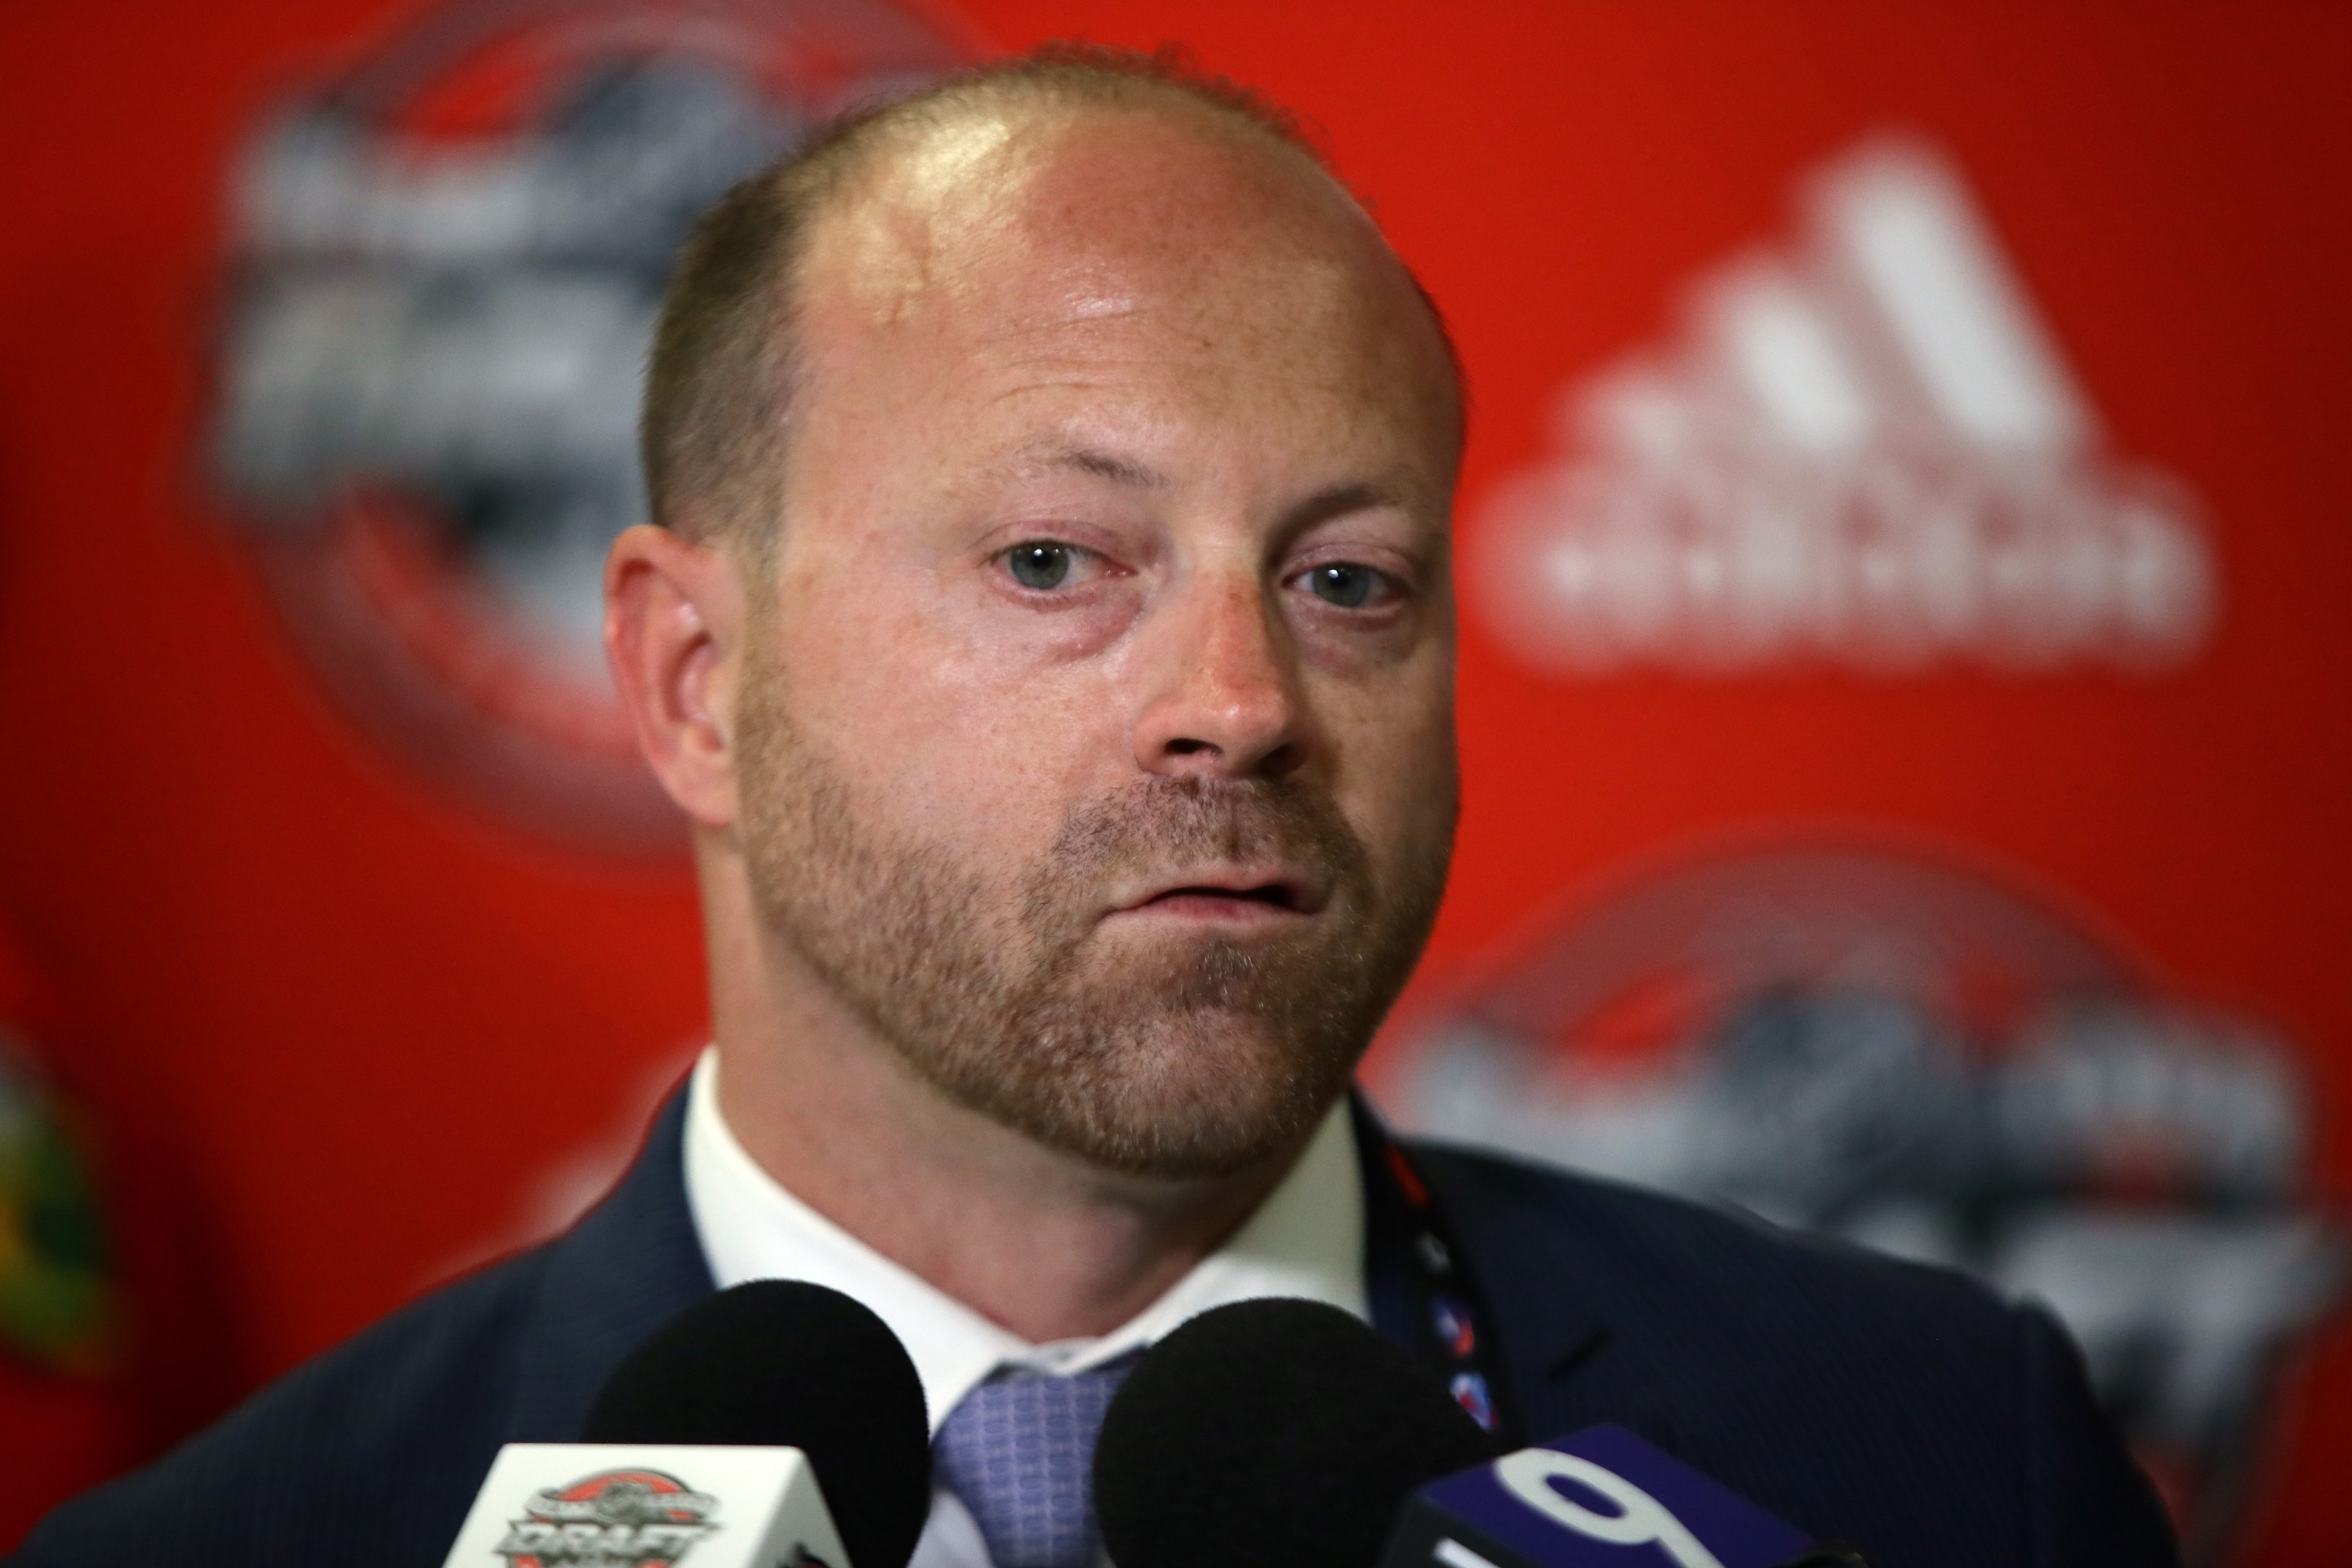 Chicago Blackhawks general manager Stan Bowman is interviewed during the 2017 NHL Draft at the United Center on June 23, 2017 in Chicago, Illinois.